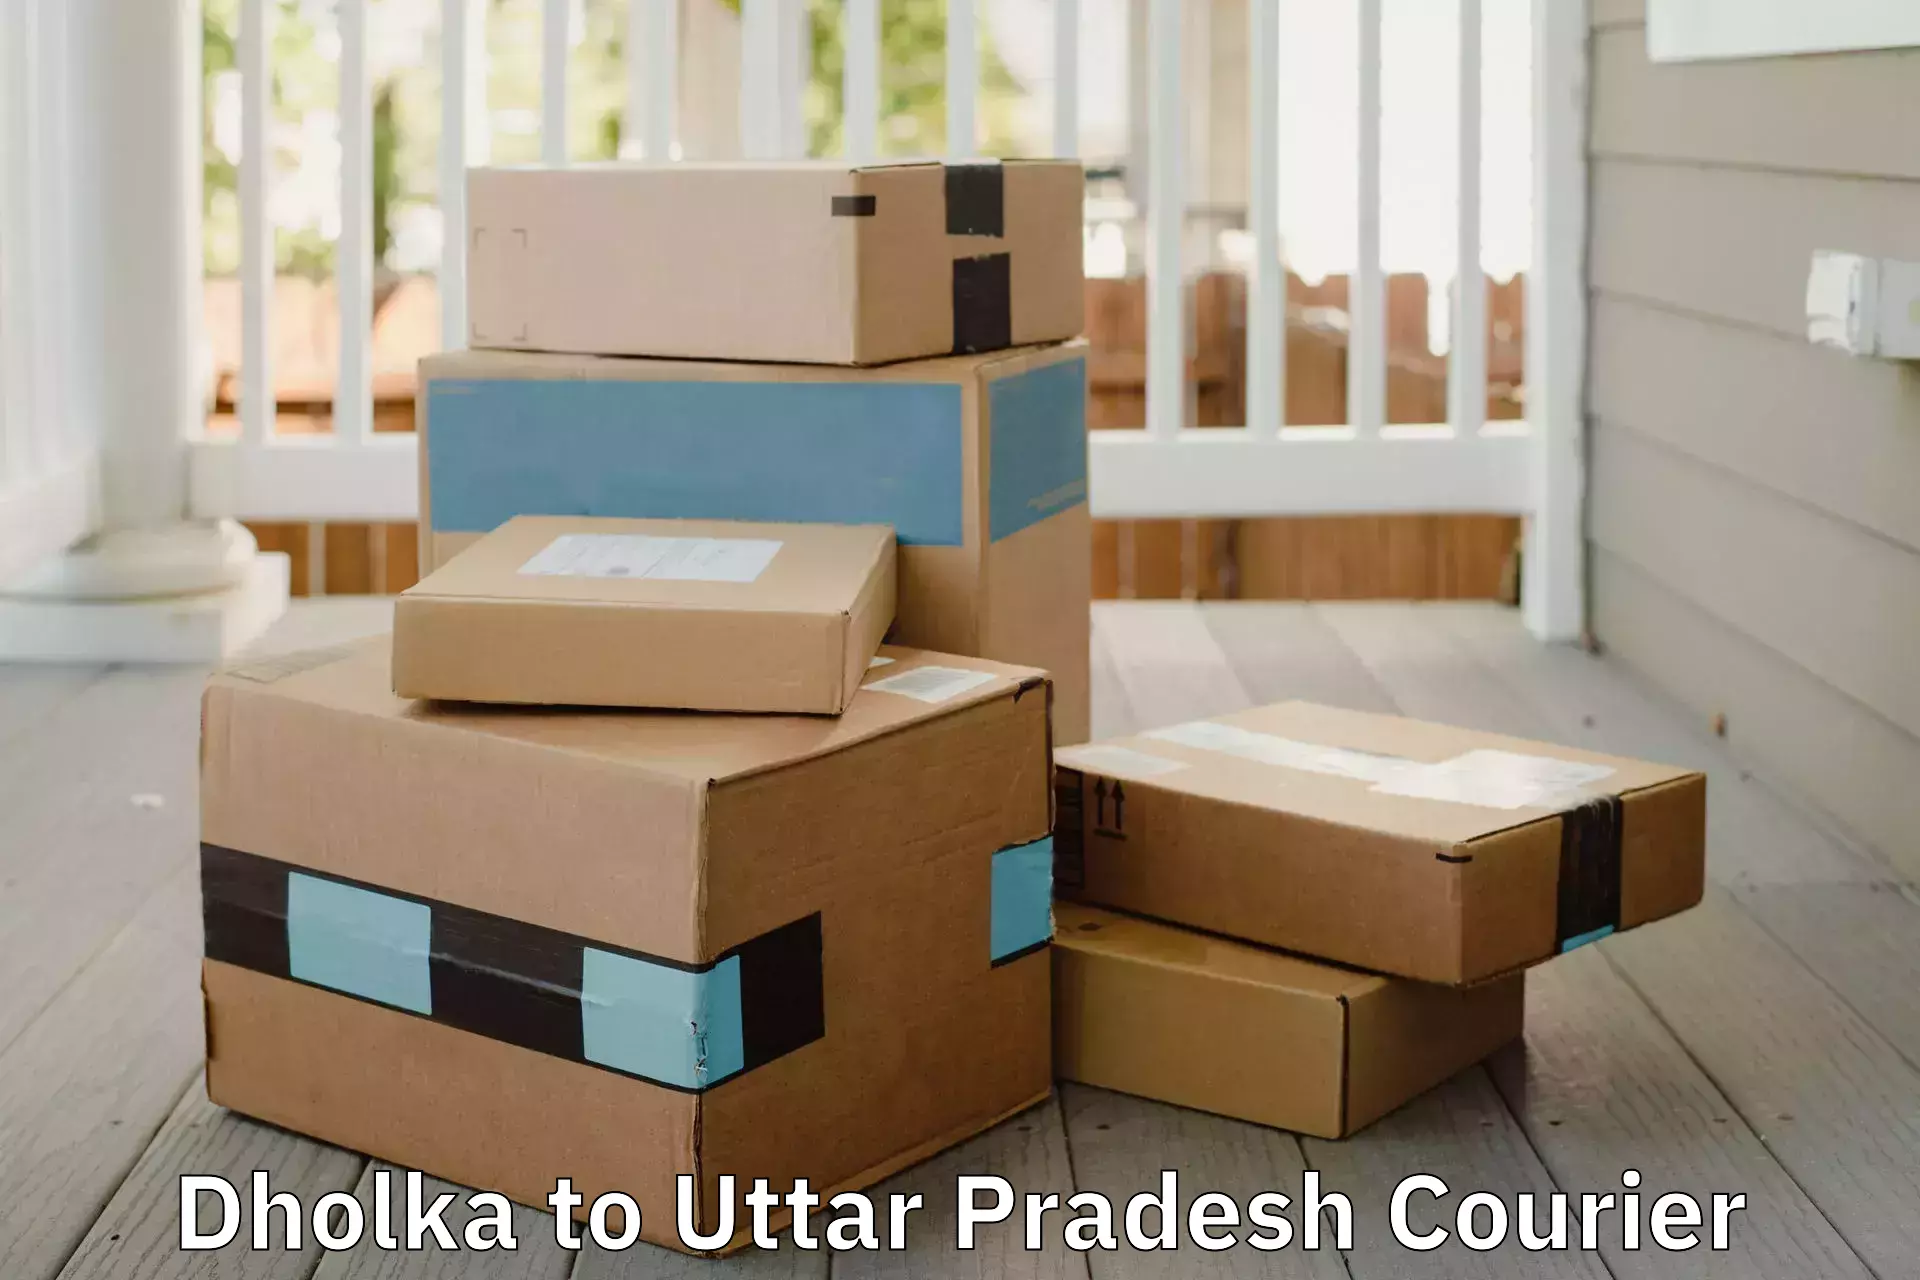 Furniture moving service in Dholka to Allahabad